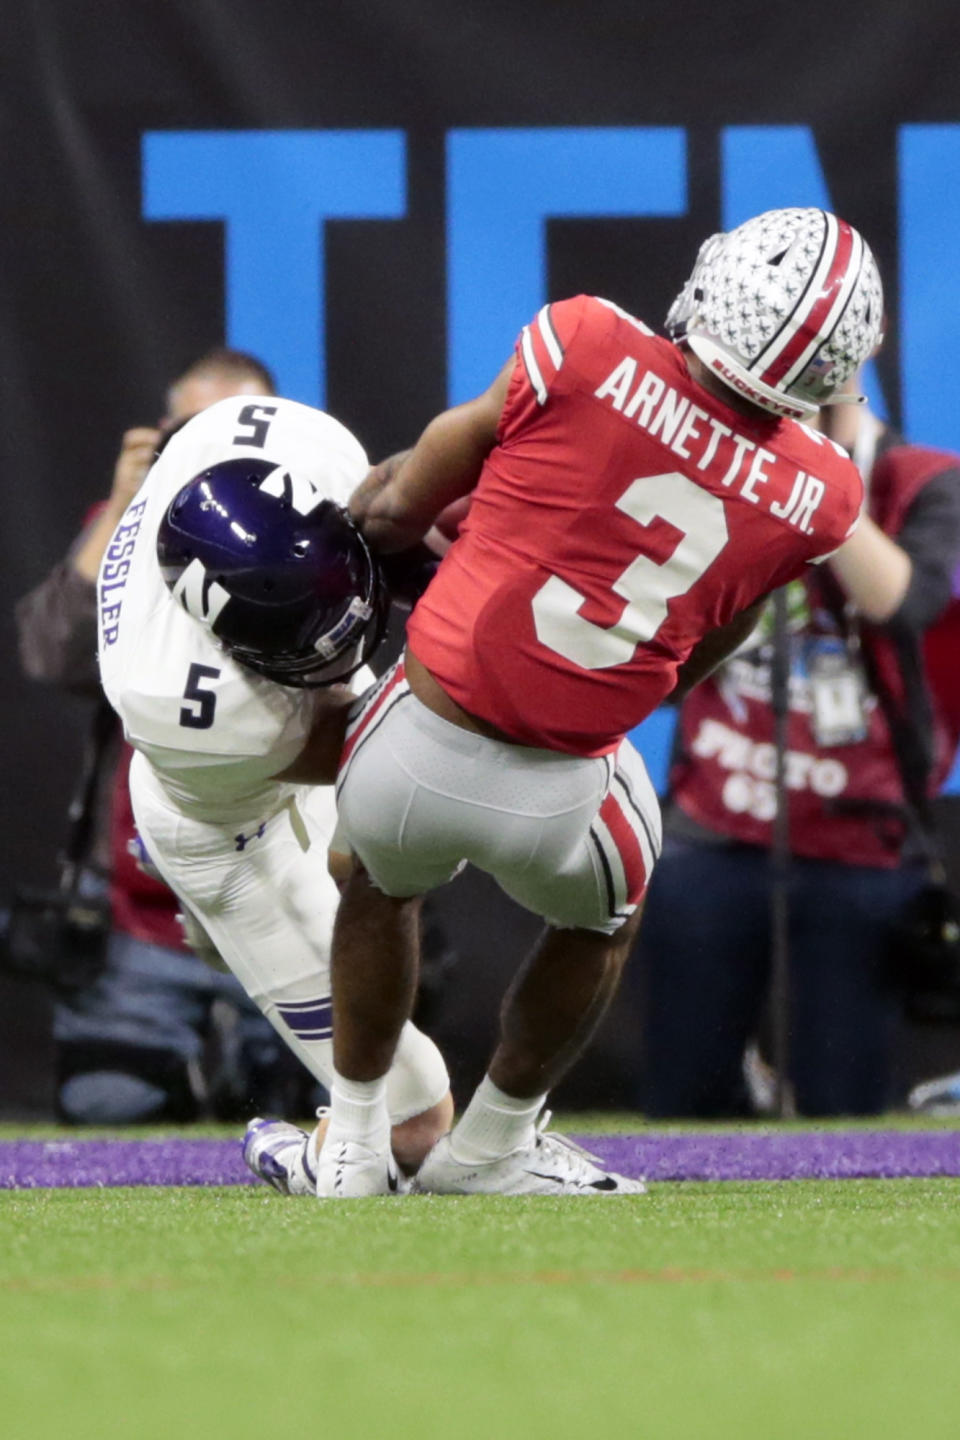 Northwestern wide receiver Charlie Fessler (5) begins to fumble as he is tackled by Ohio State cornerback Damon Arnette (3) during the second half of the Big Ten championship NCAA college football game, Saturday, Dec. 1, 2018, in Indianapolis. After review, Fessler was ruled down before the fumble and Northwestern maintained in position of the ball. (AP Photo/AJ Mast)